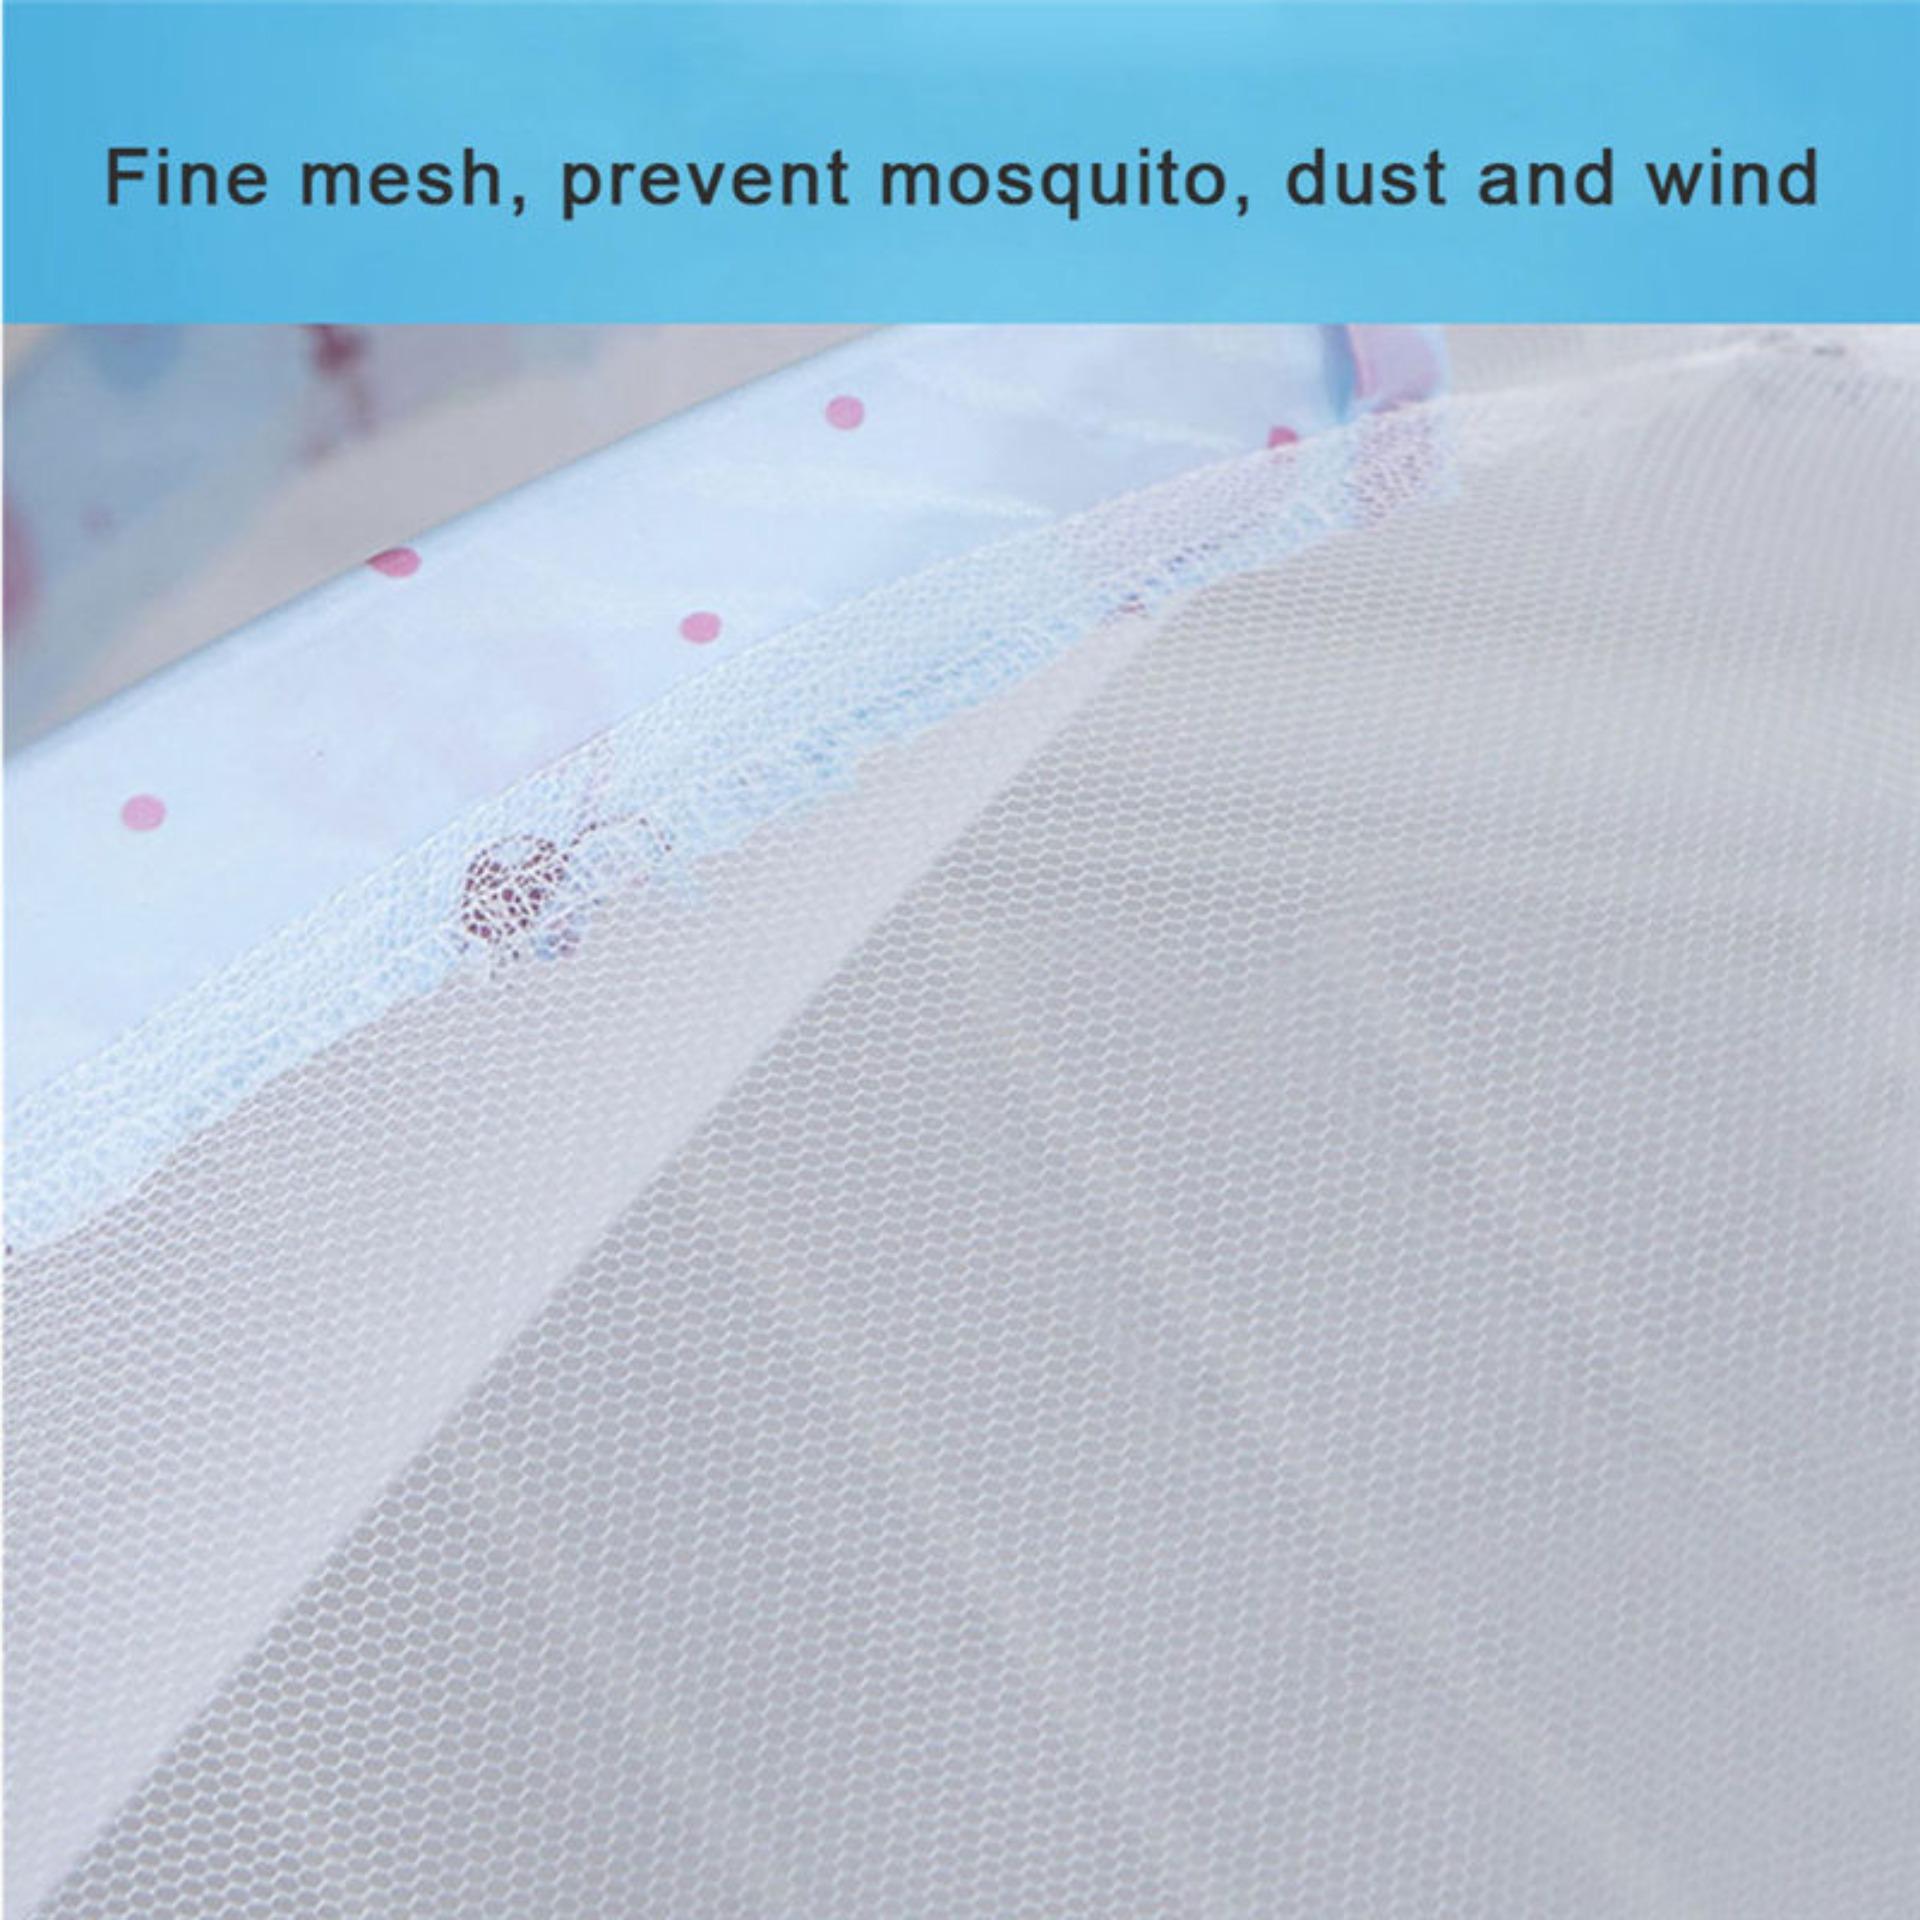 Fancytoy Foldable Baby Bed Portable Folding Crib Mosquito Net Safe Mesh